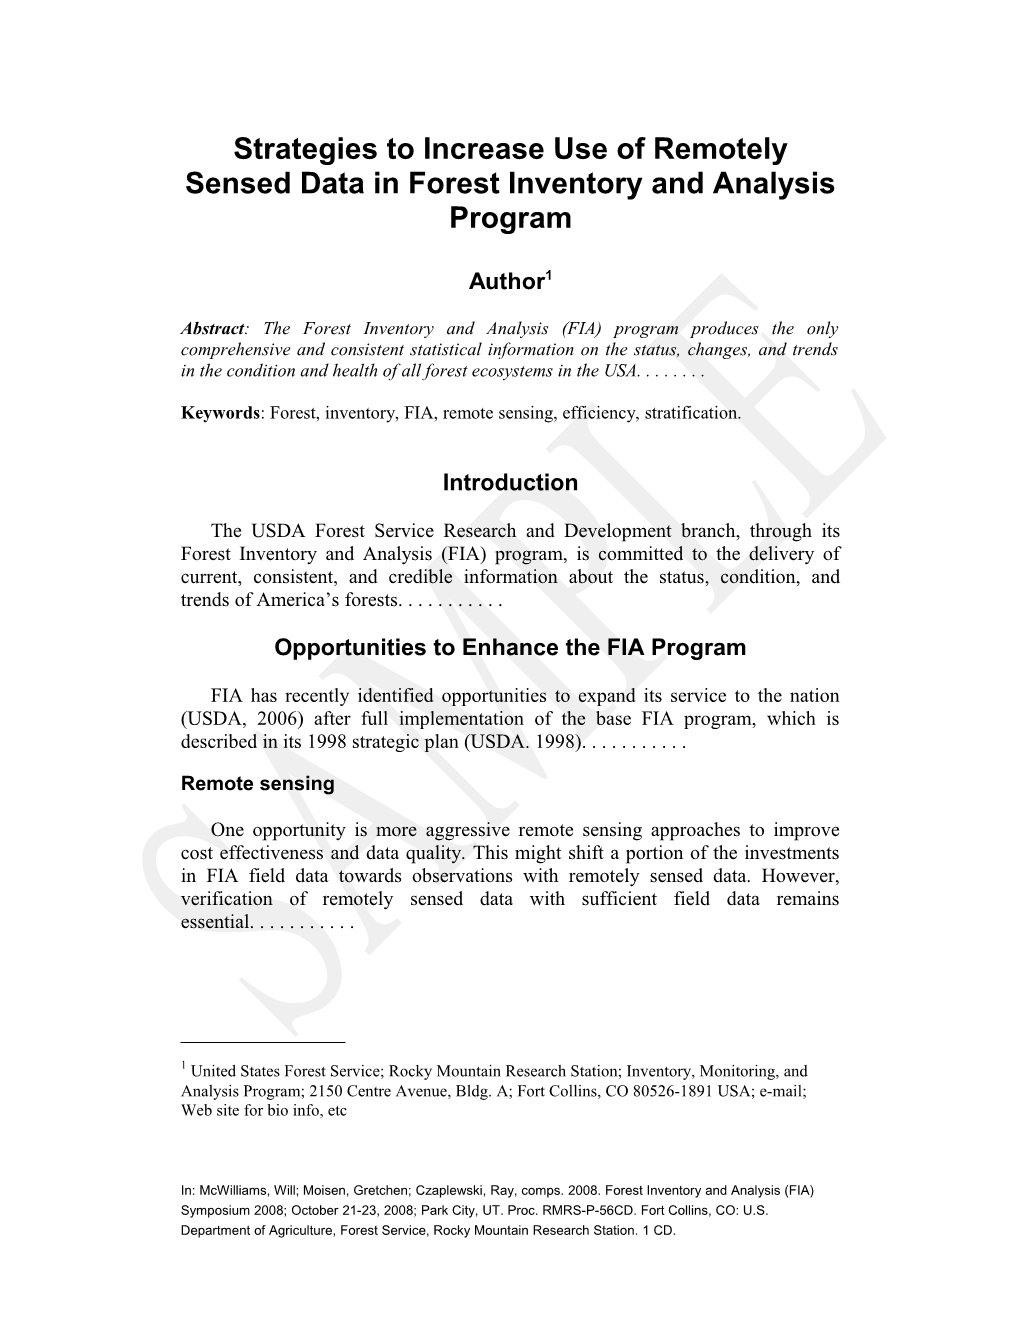 Stratgies to Increase Use of Remotely Sensed Data in Forest Inventory and Analysis Program